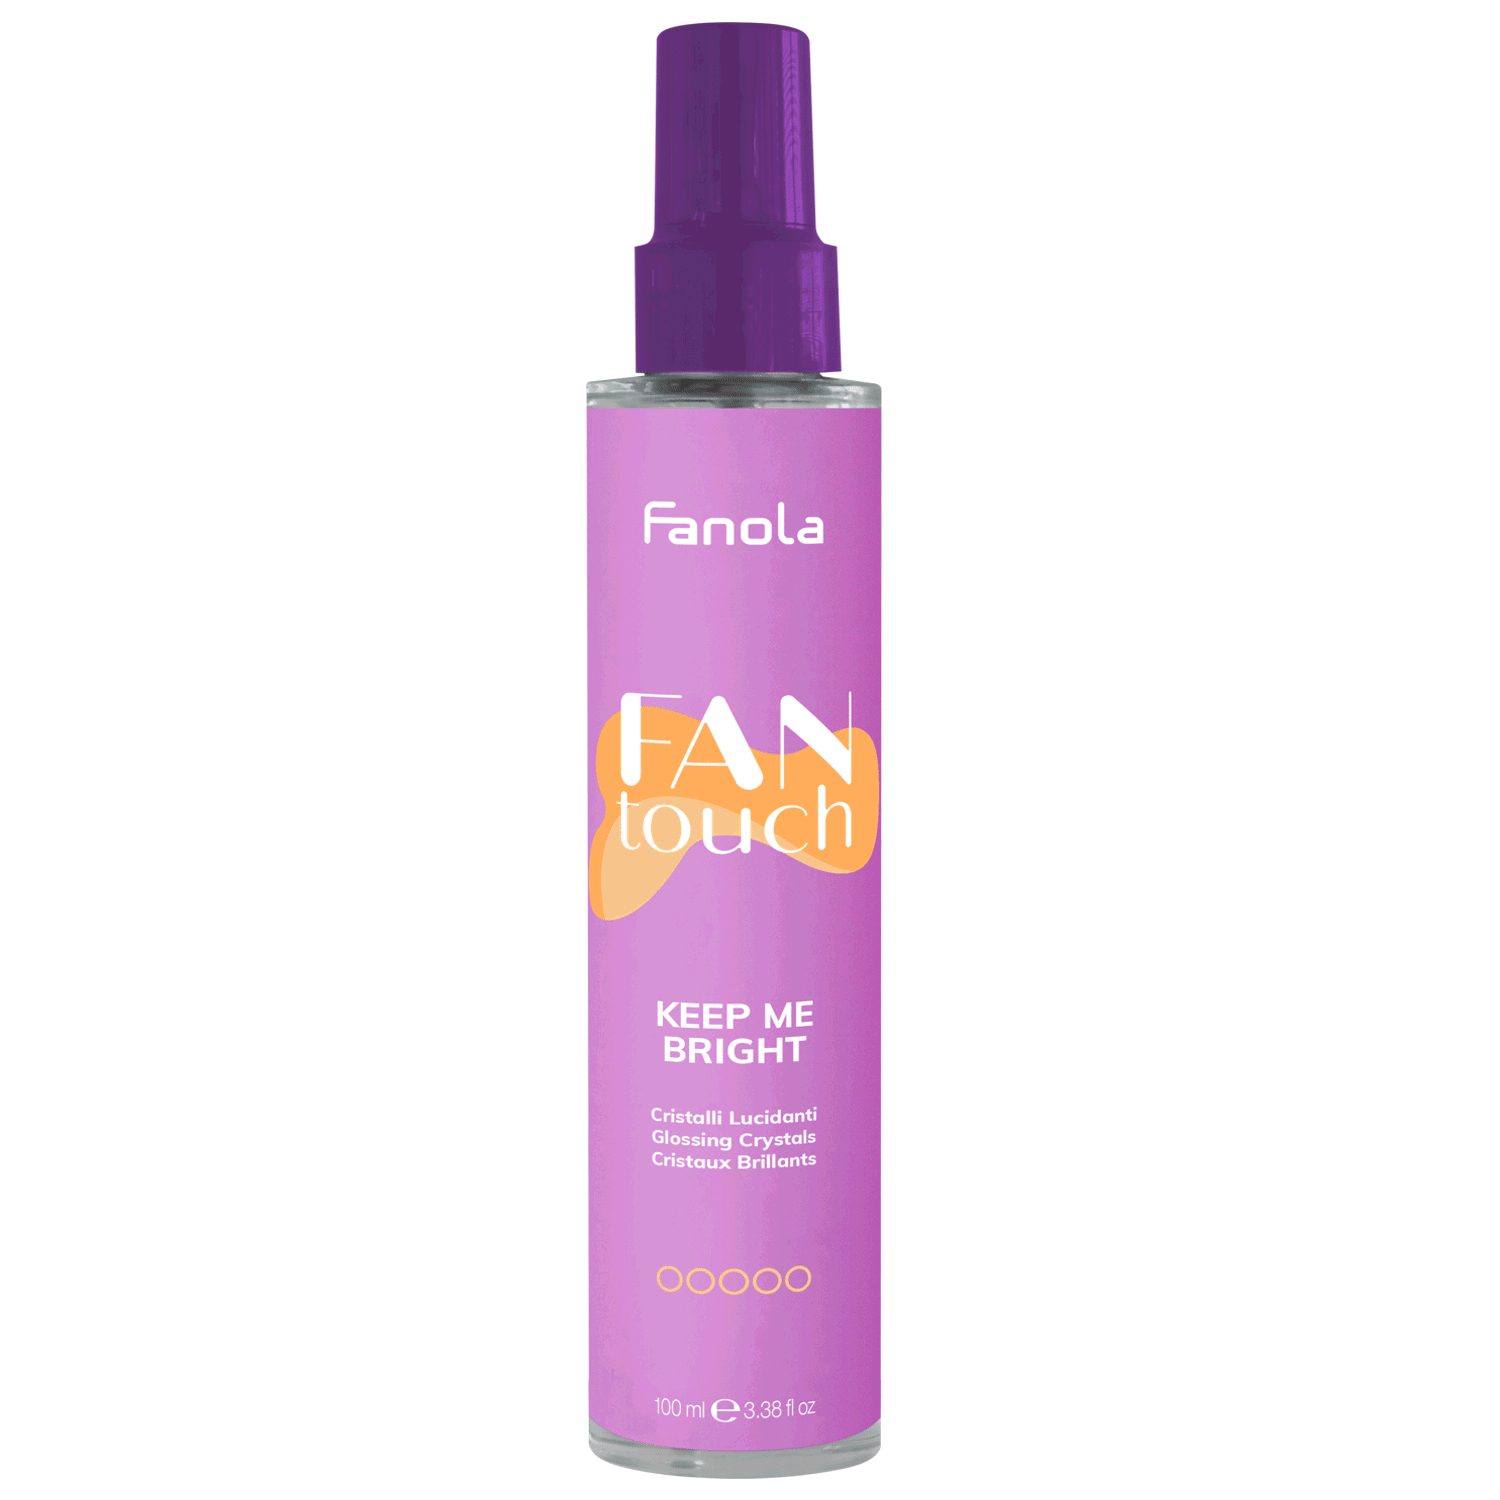 Fanola FANTOUCH Glossing Crystals 100 ml